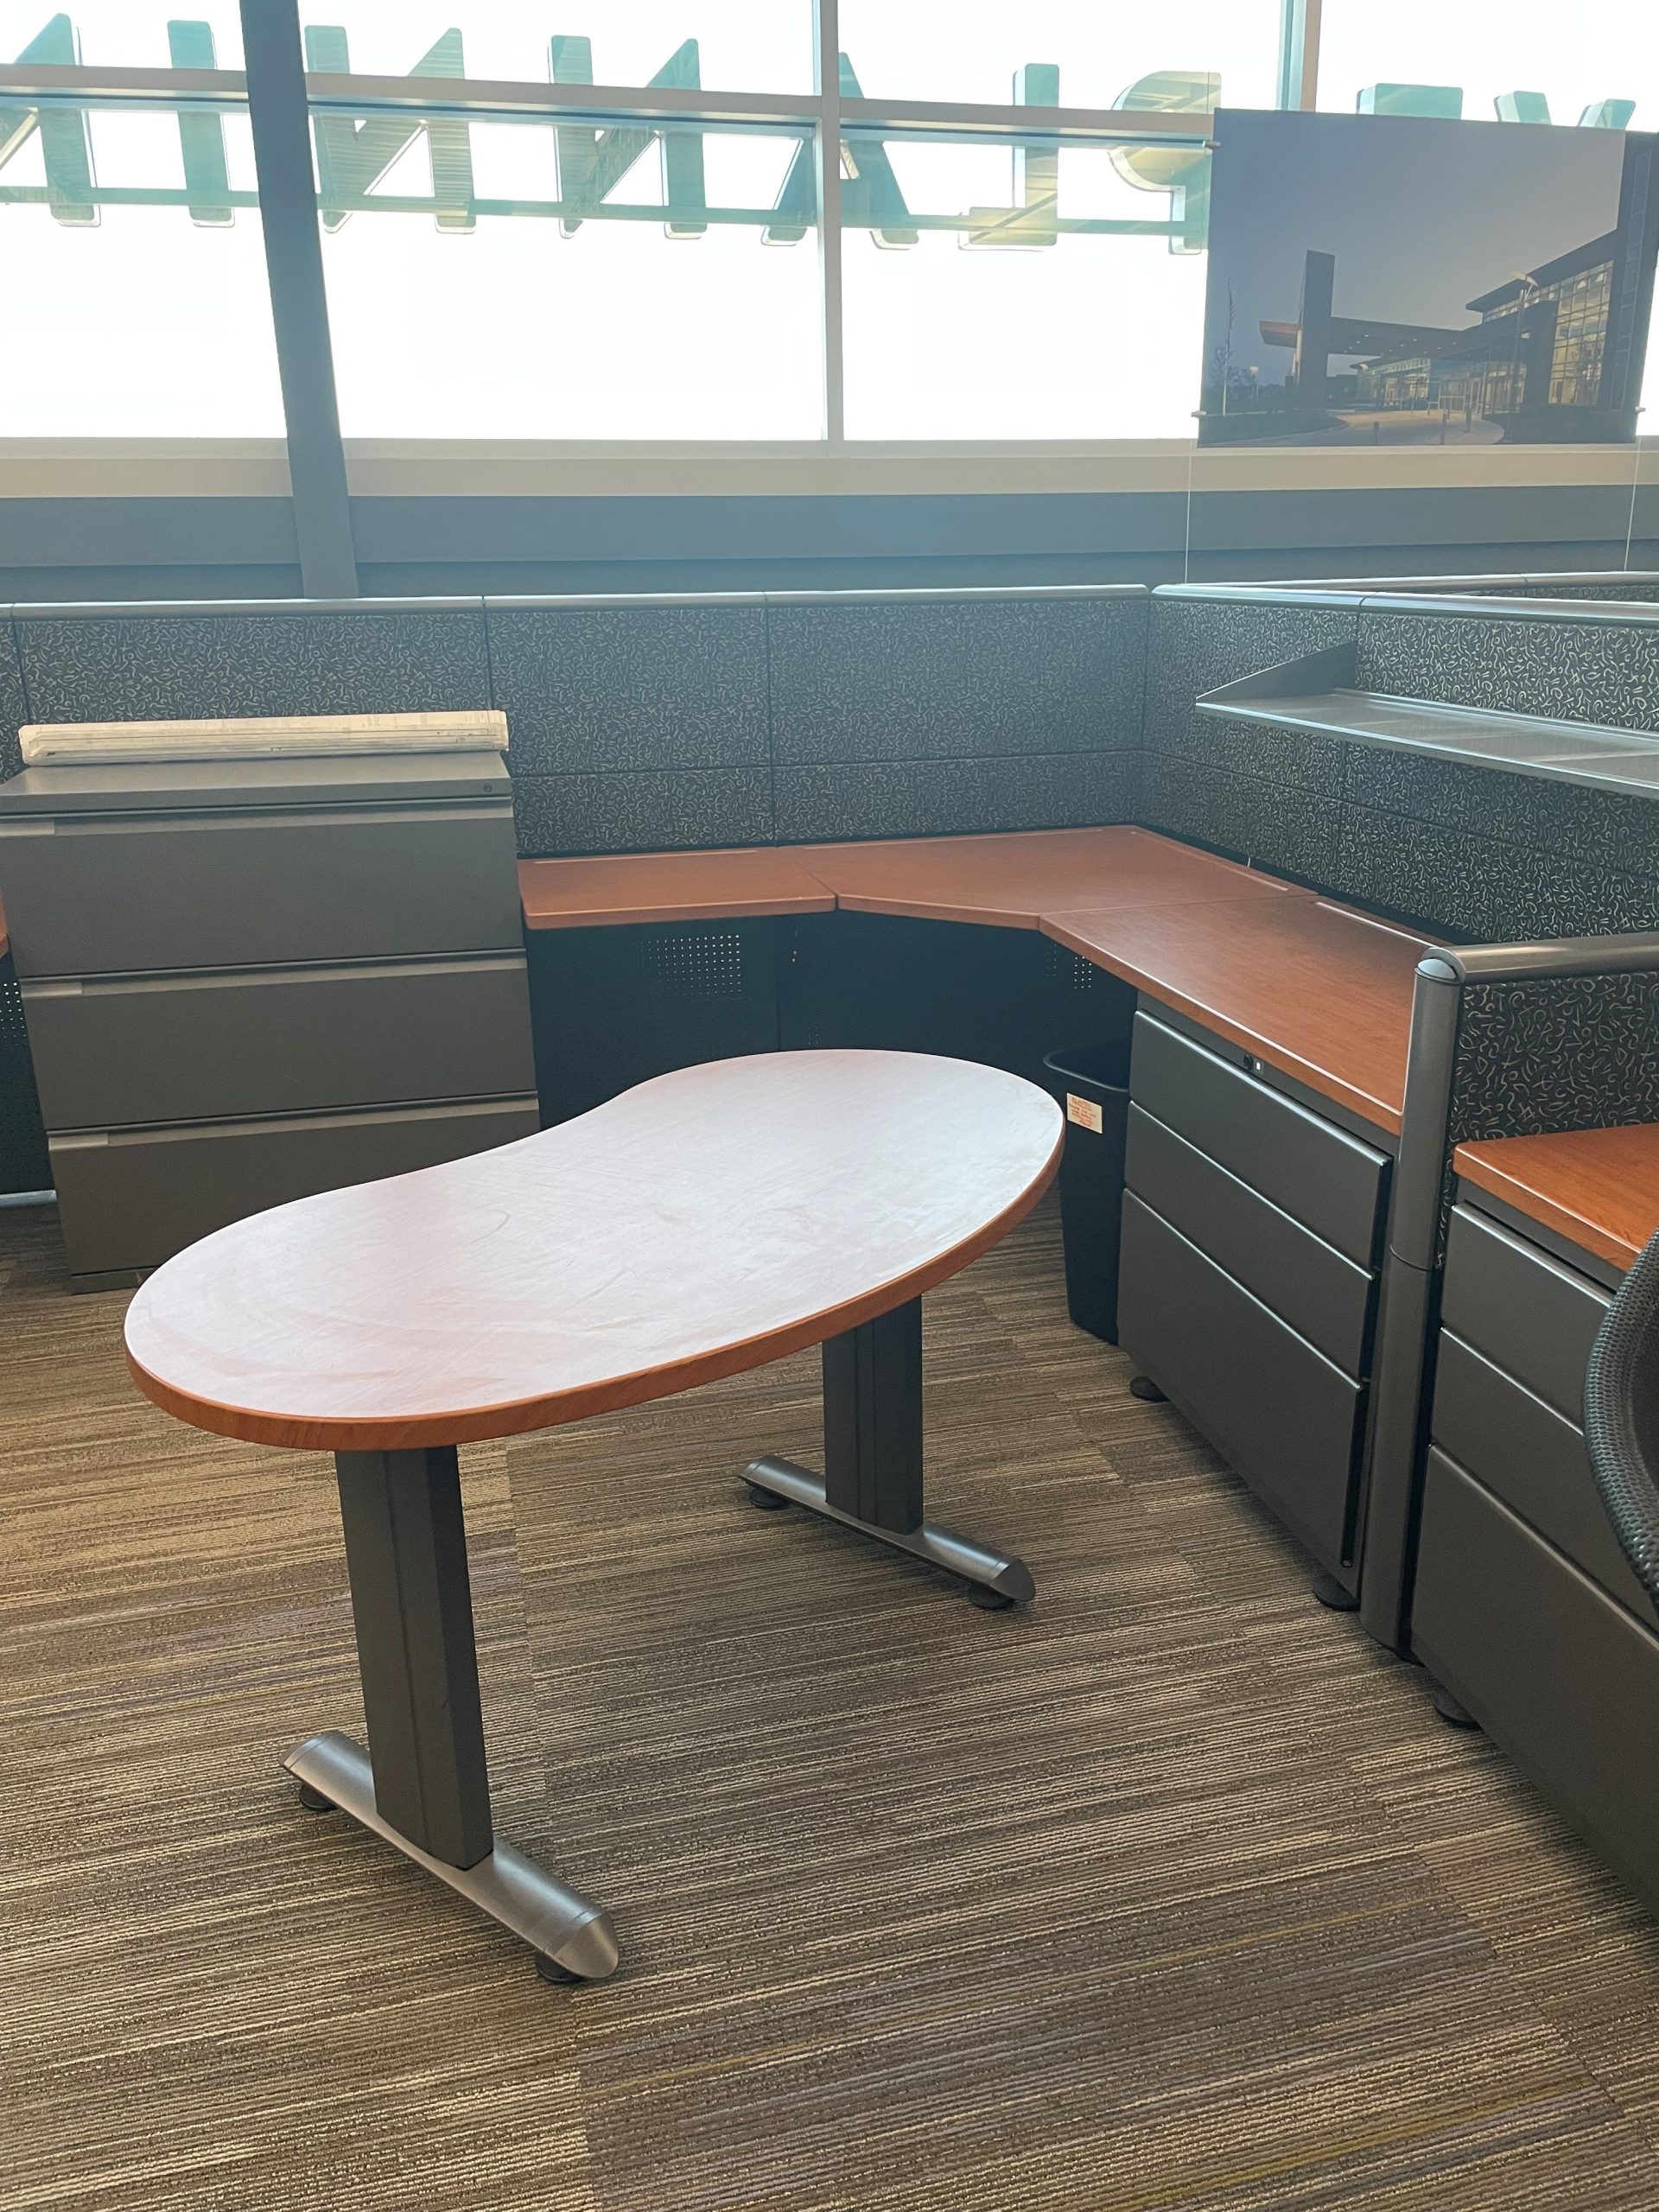 Cubicle with table